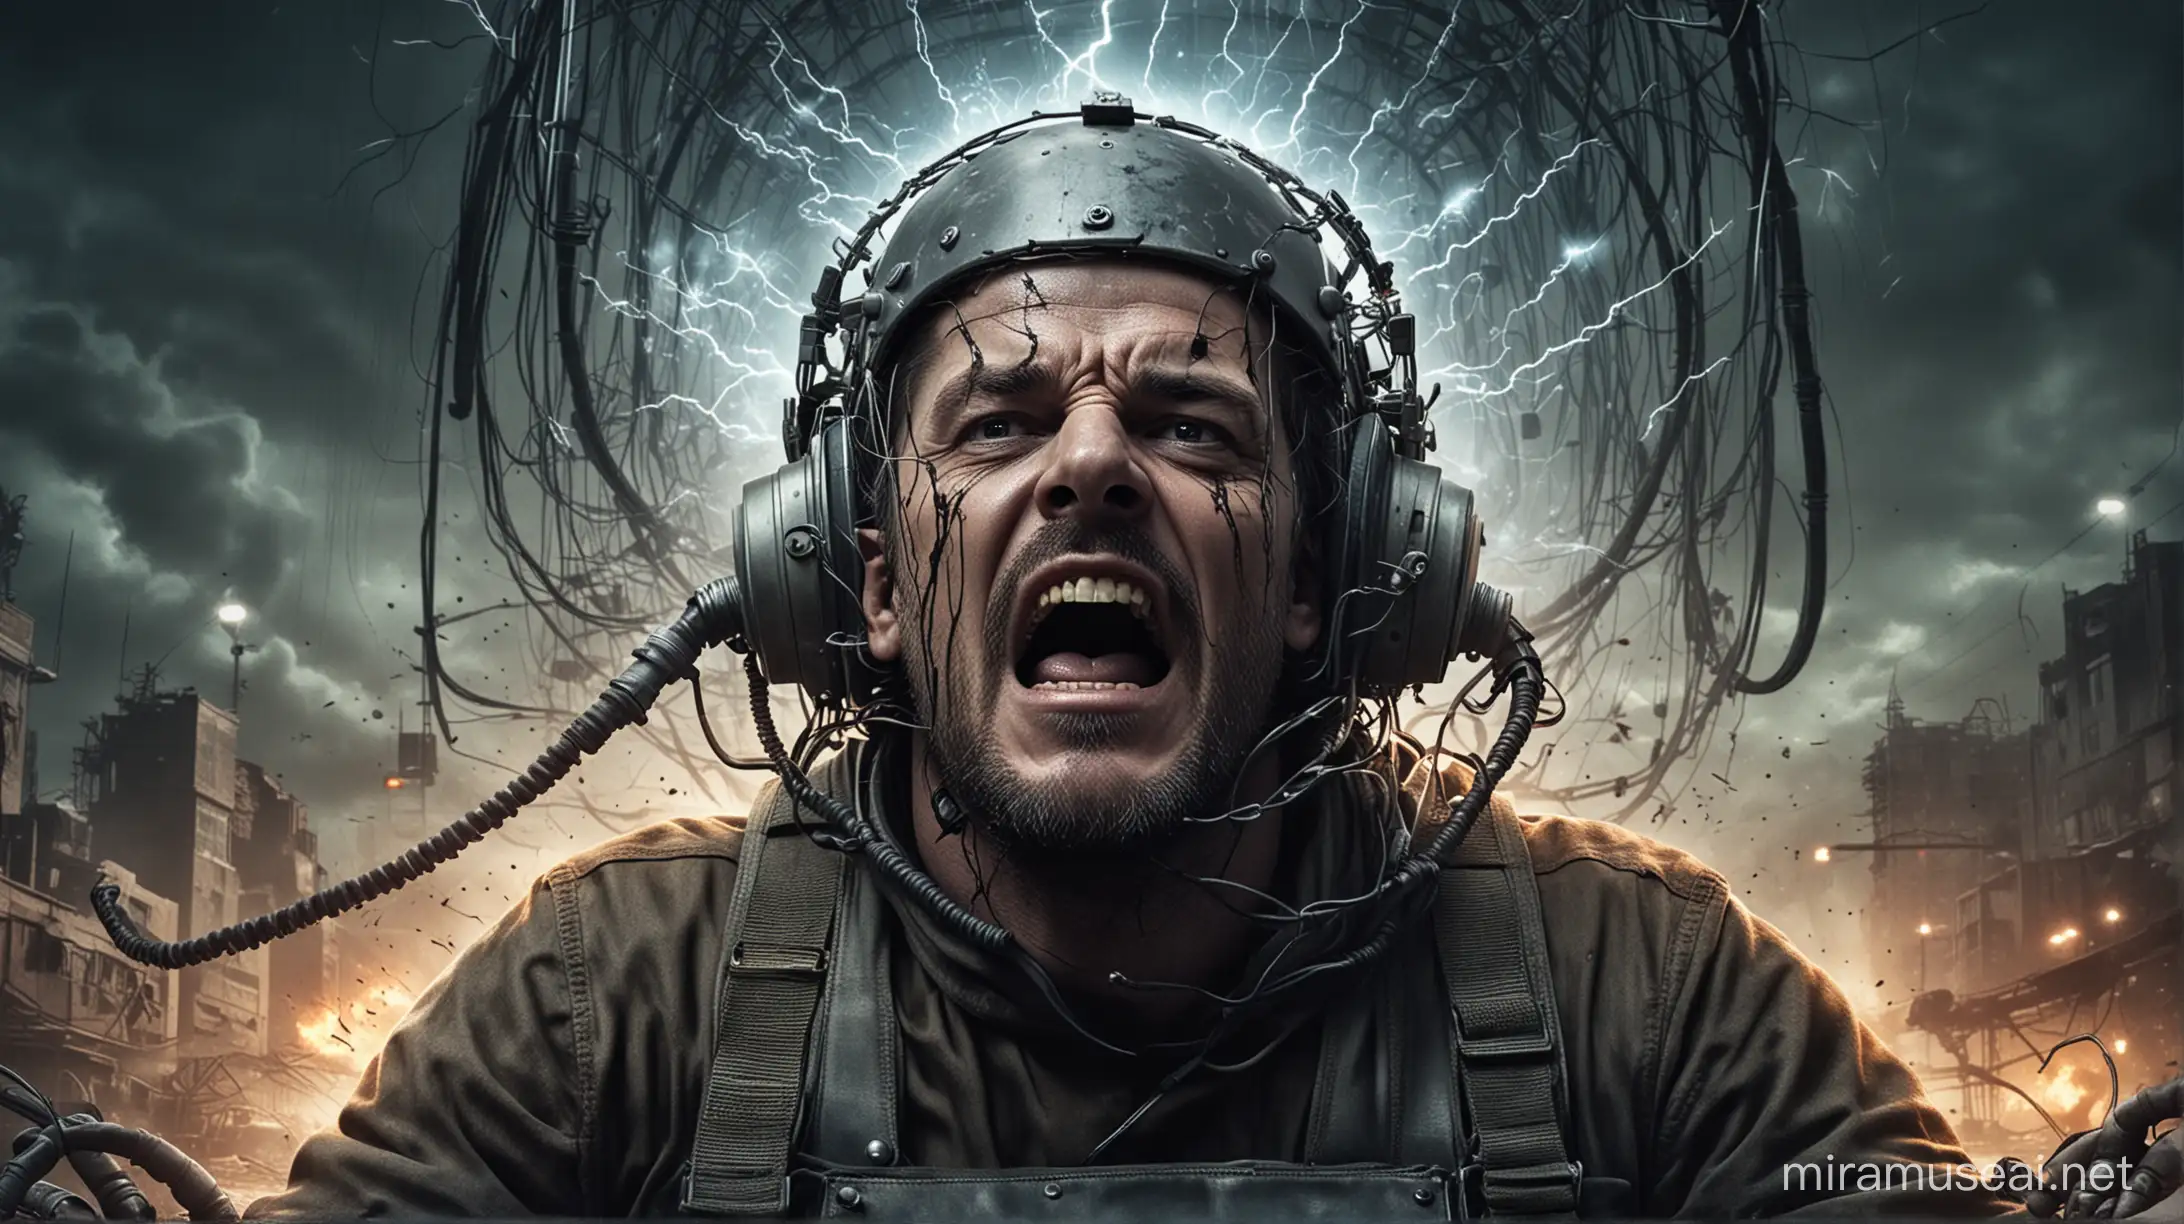 futuristic movie poster of a screaming man strapped down in an electric chair with post-apocalyptic background with nodes and wires coming from a helmet 